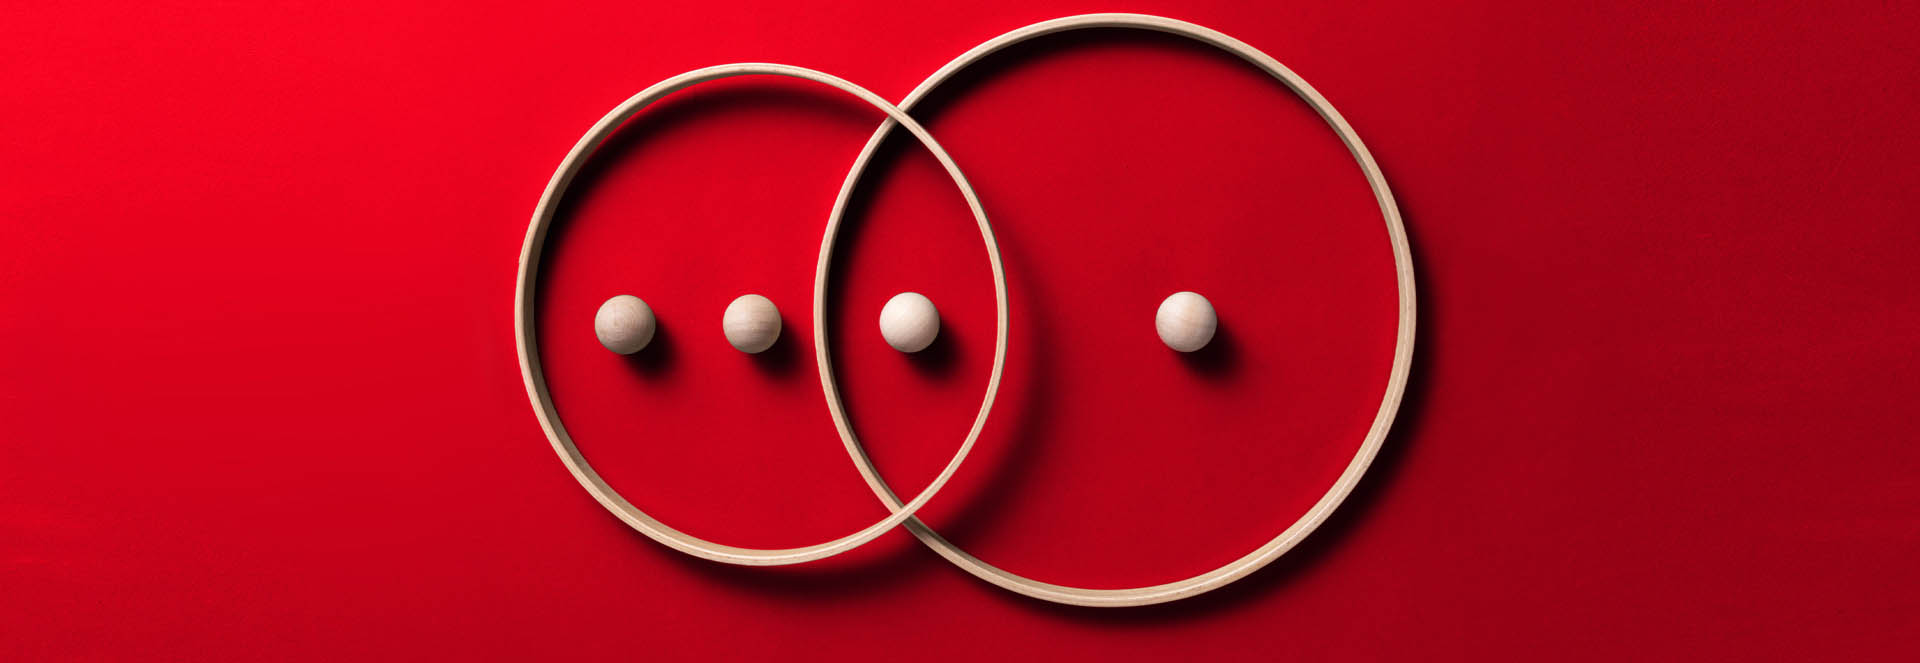 Crossing rings with spheres on red colored background